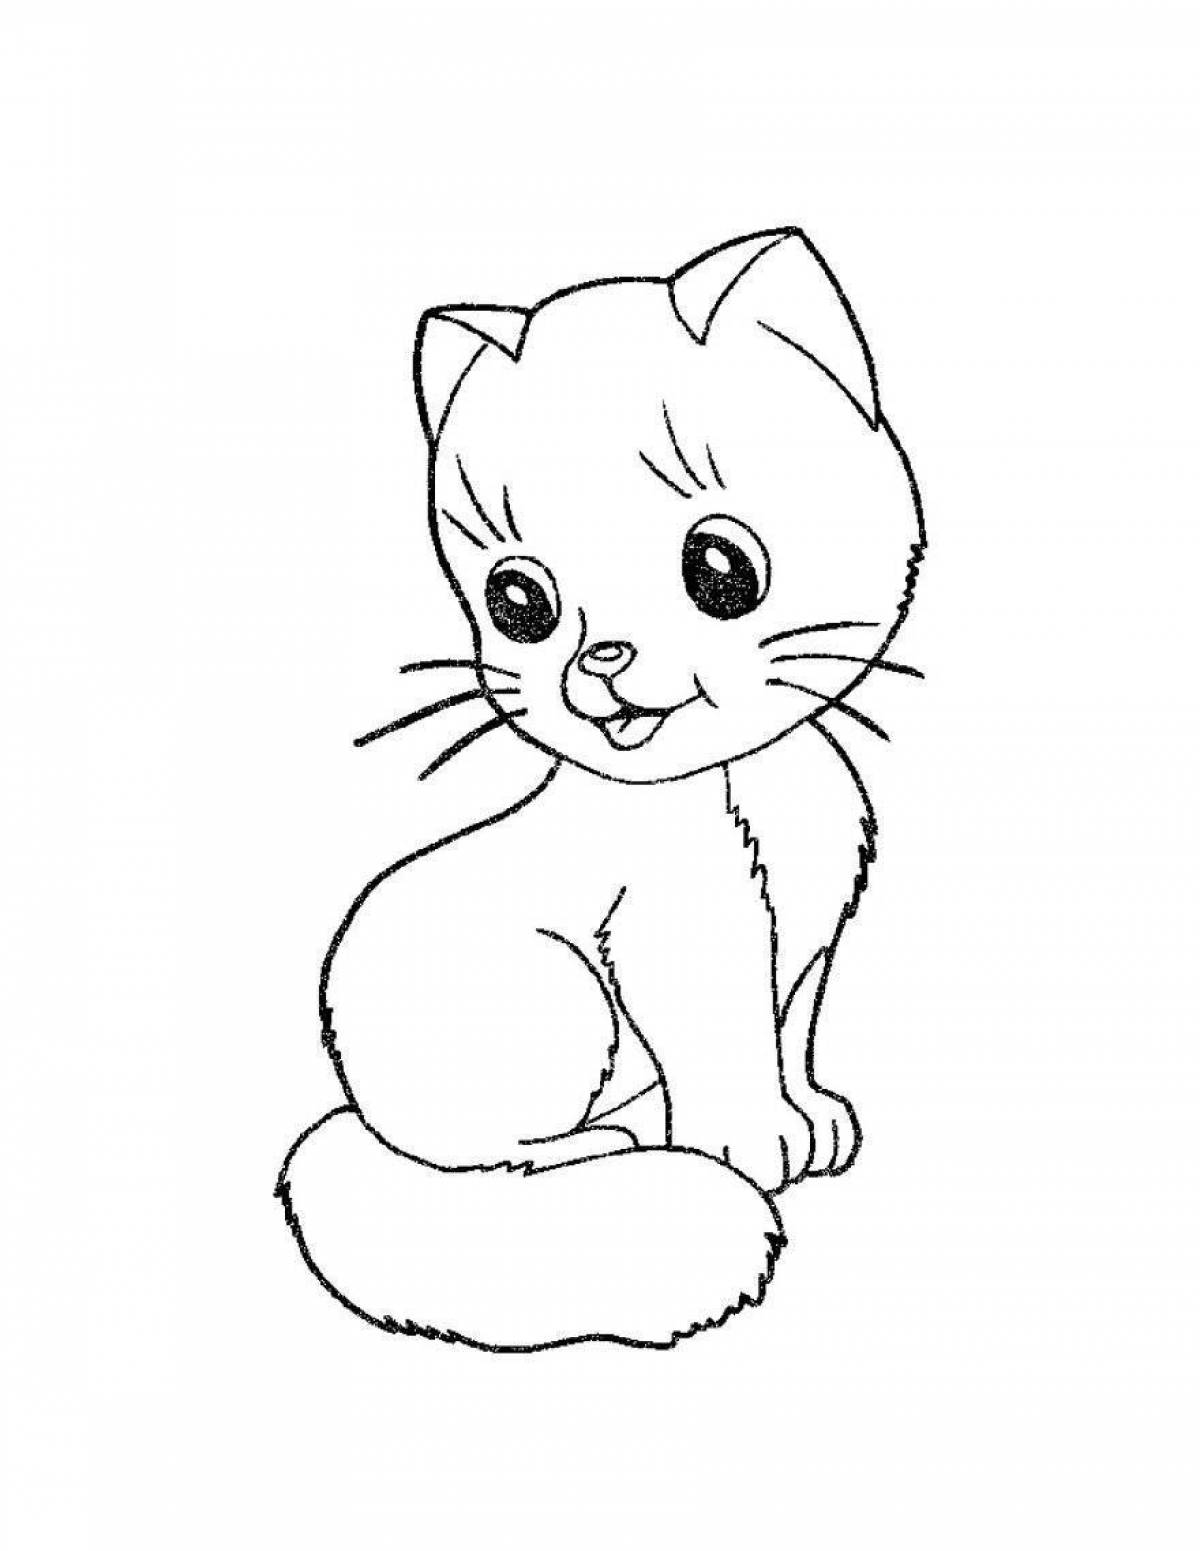 Animated cat coloring pages for kids